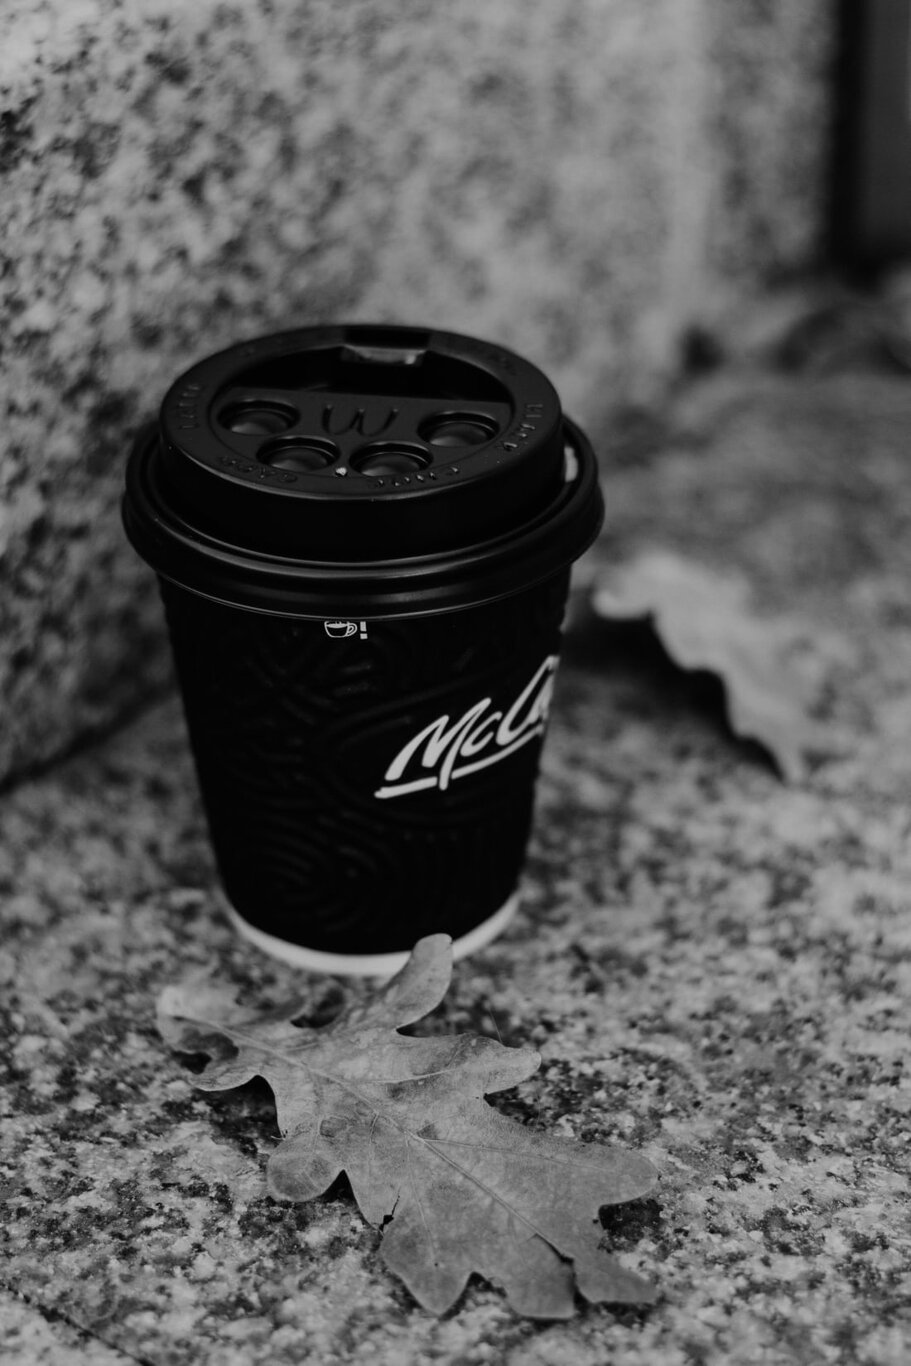 A McDonald’s takeaway coffee cup sits on a stone bench surrounded by leaves. Via Unsplash